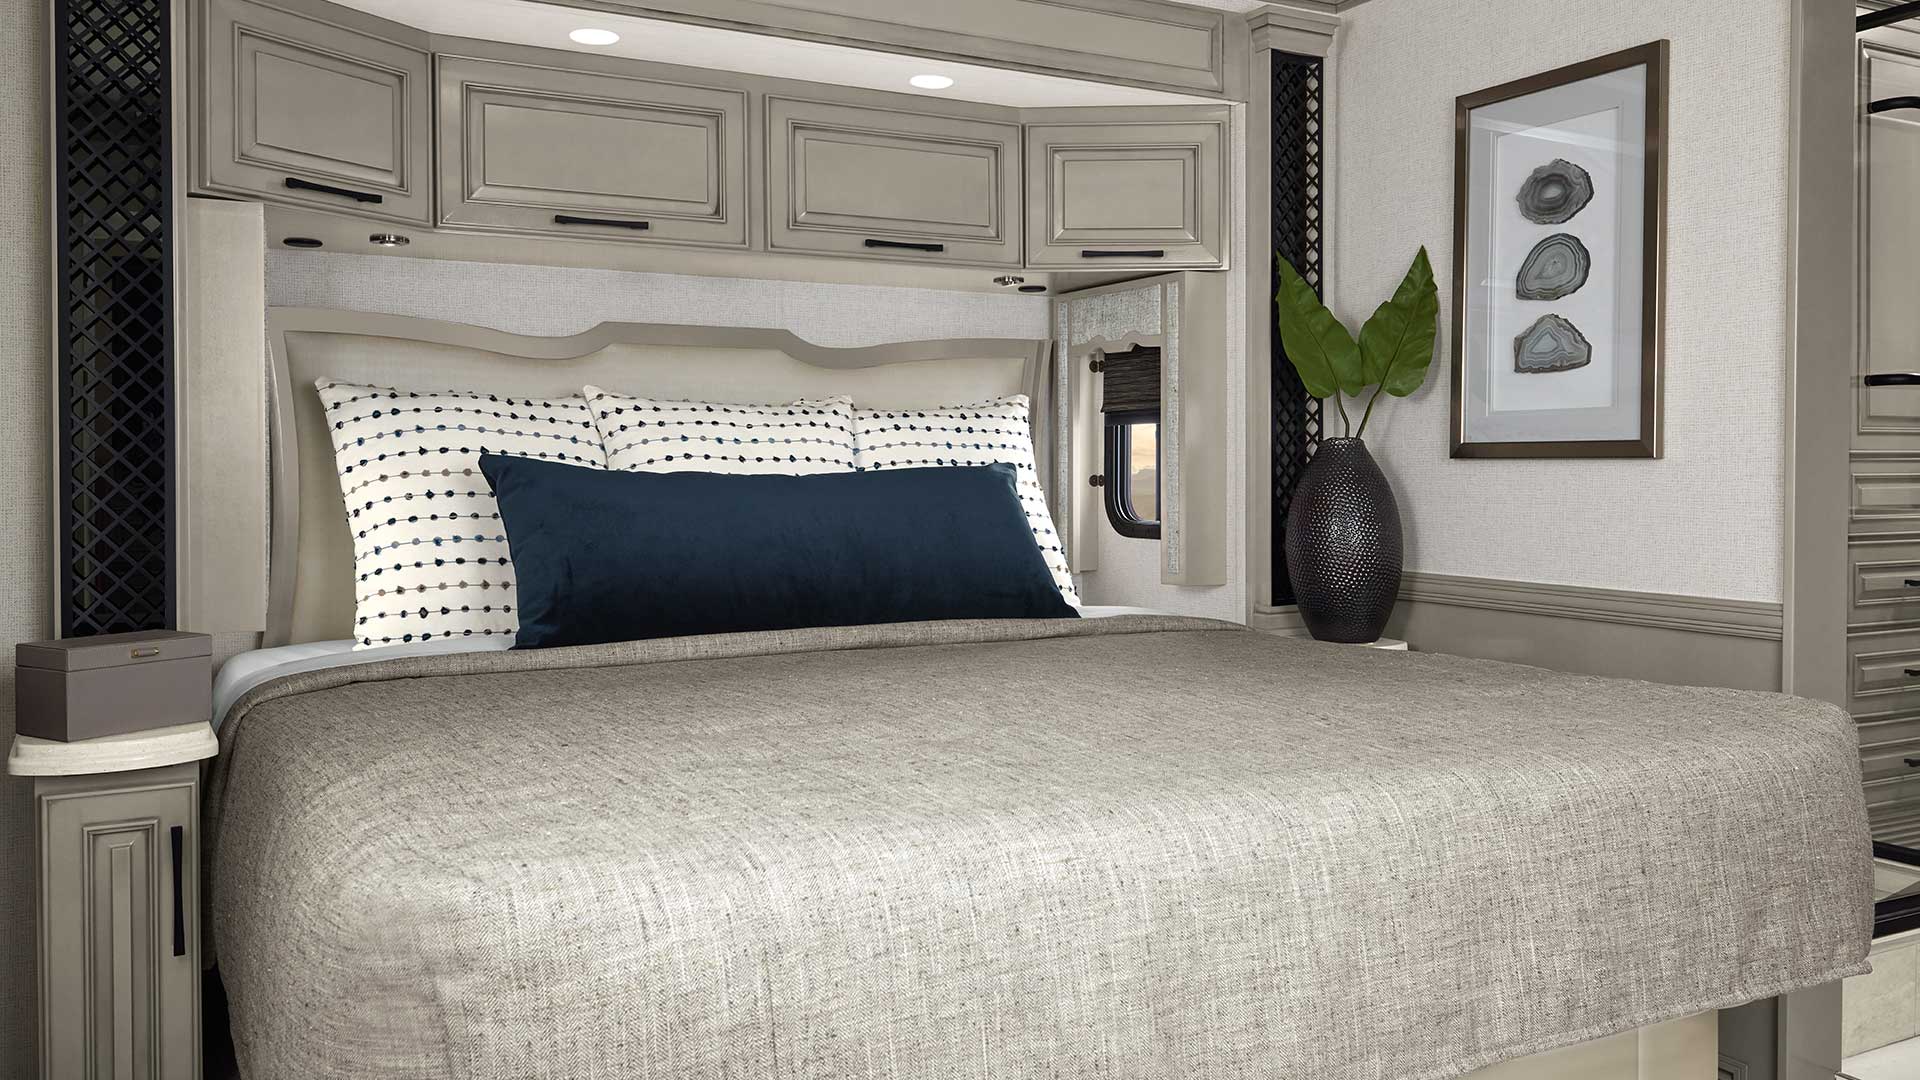 London Aire Bed